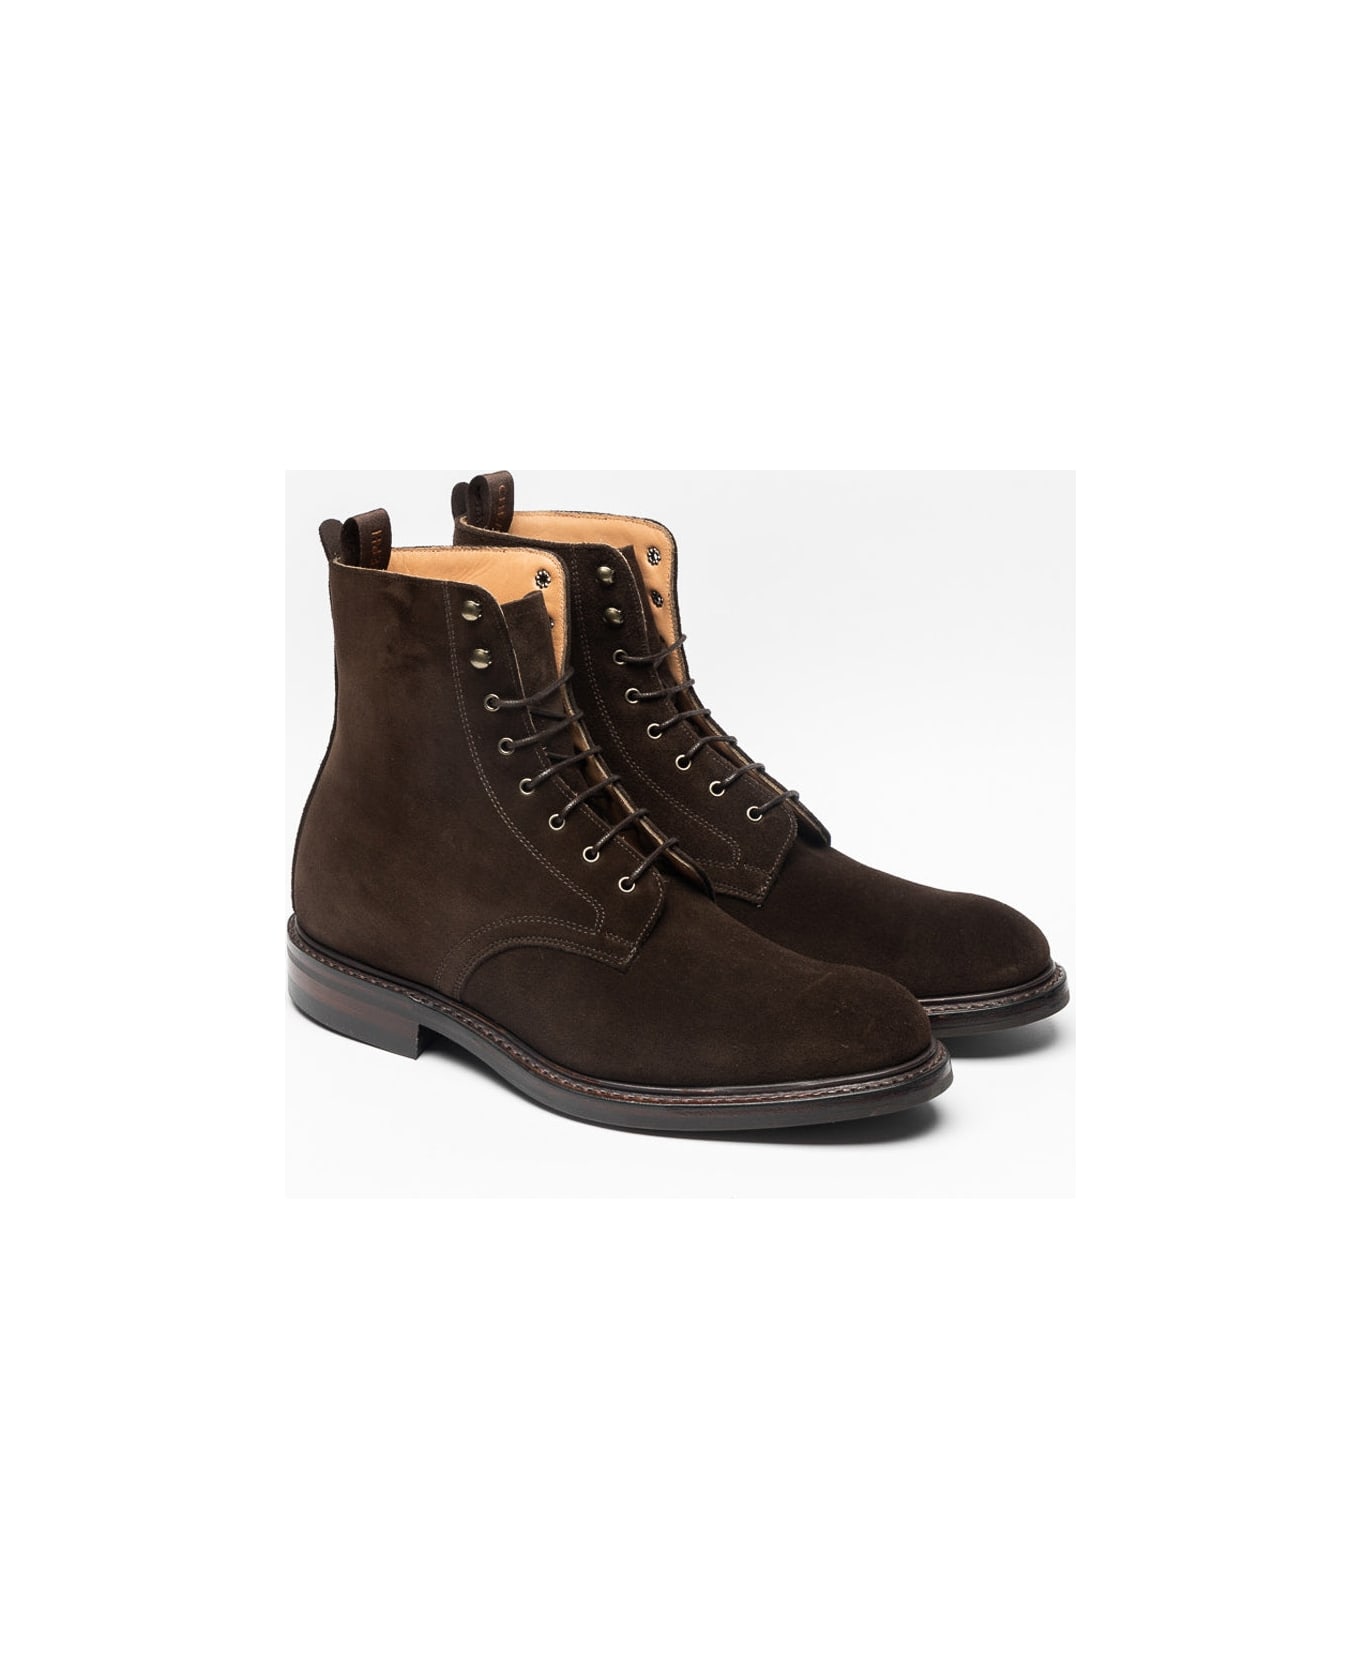 Cheaney Leonard Ii R Bitter Chocolate Suede Derby Boot ブーツ